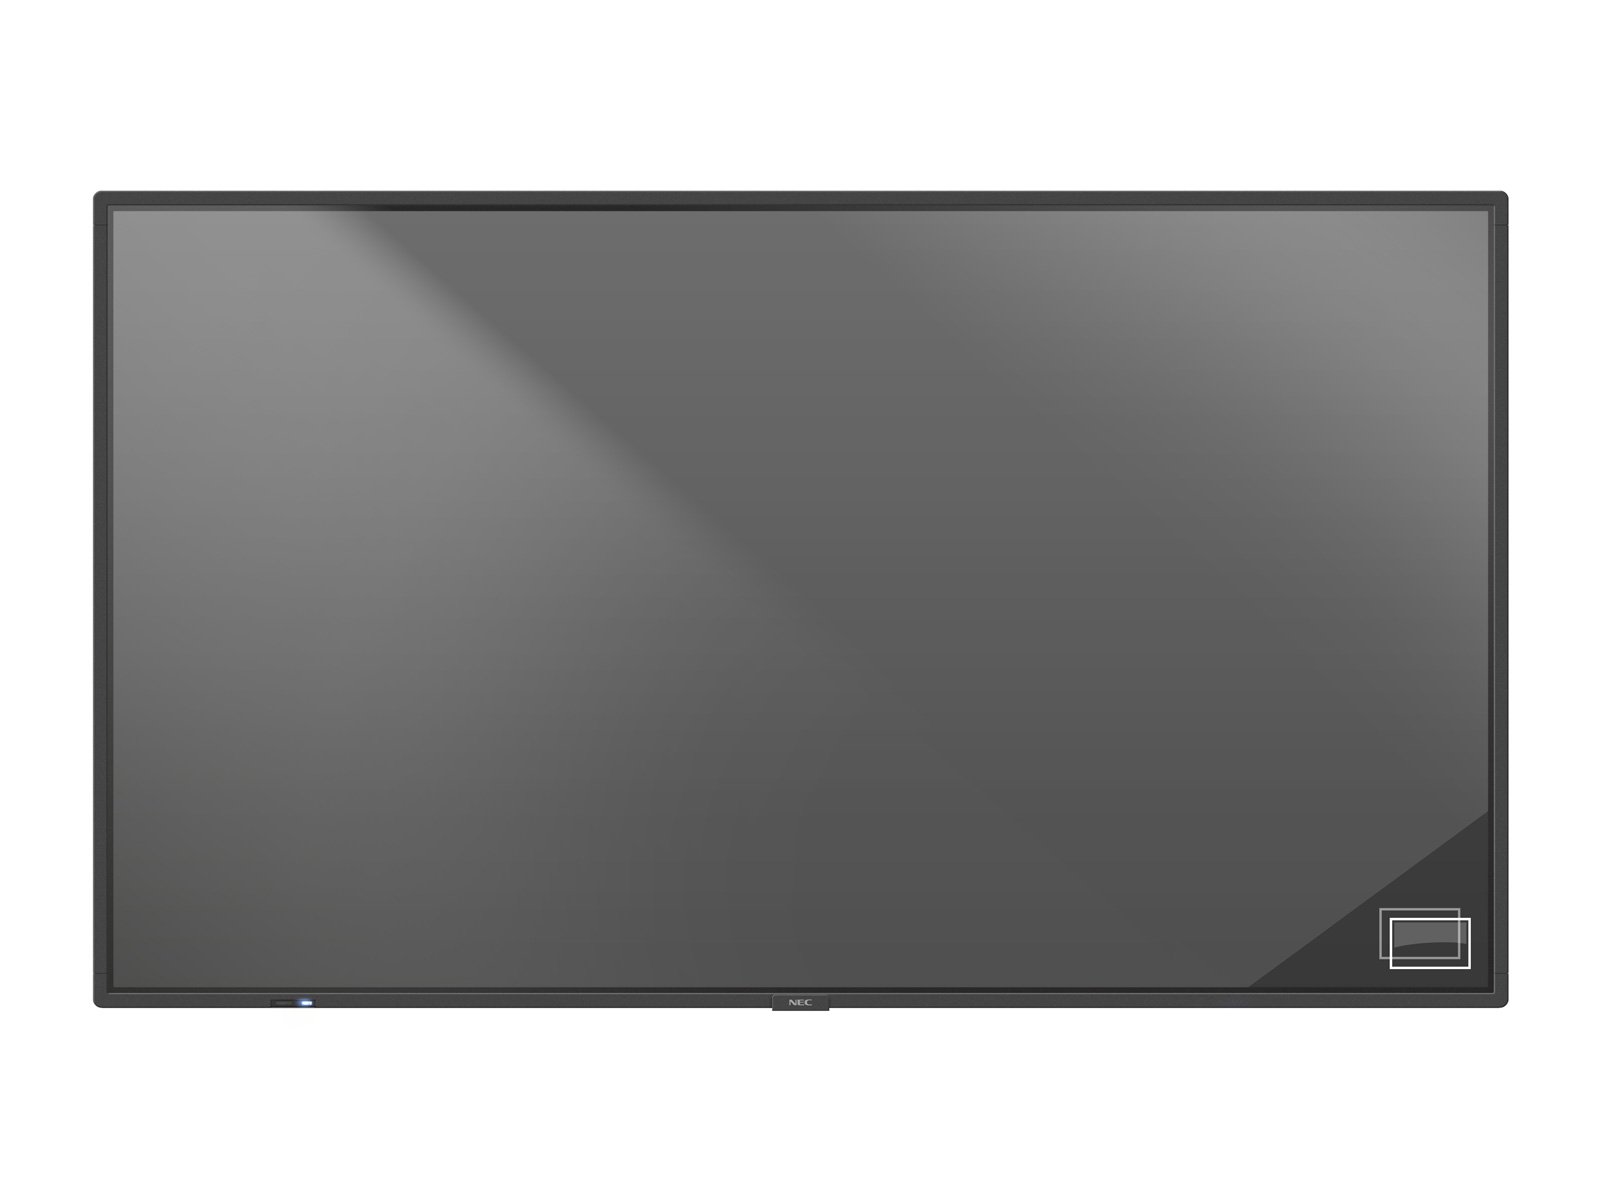 NEC MultiSync P495 PG - 49 inch - 700 cd/m² - Ultra-HD - 3840x2160 pixel - 24/7 - with protection glass - Large Format Display